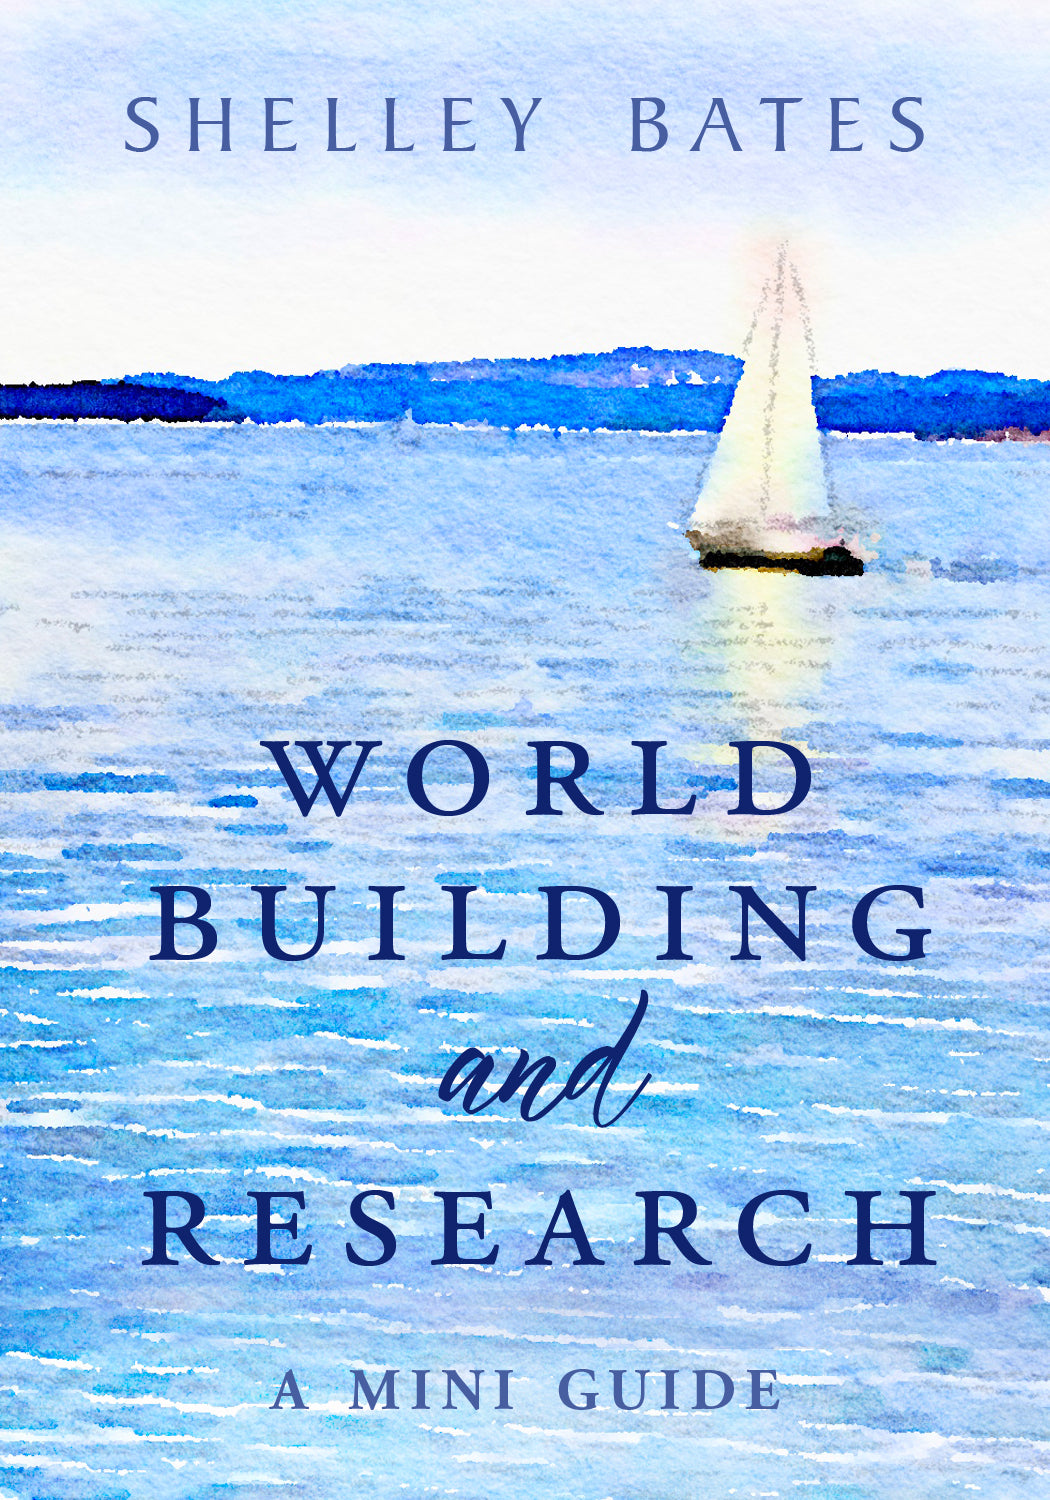 World Building and Research: Make Them Work for You by Shelley Bates, PhD